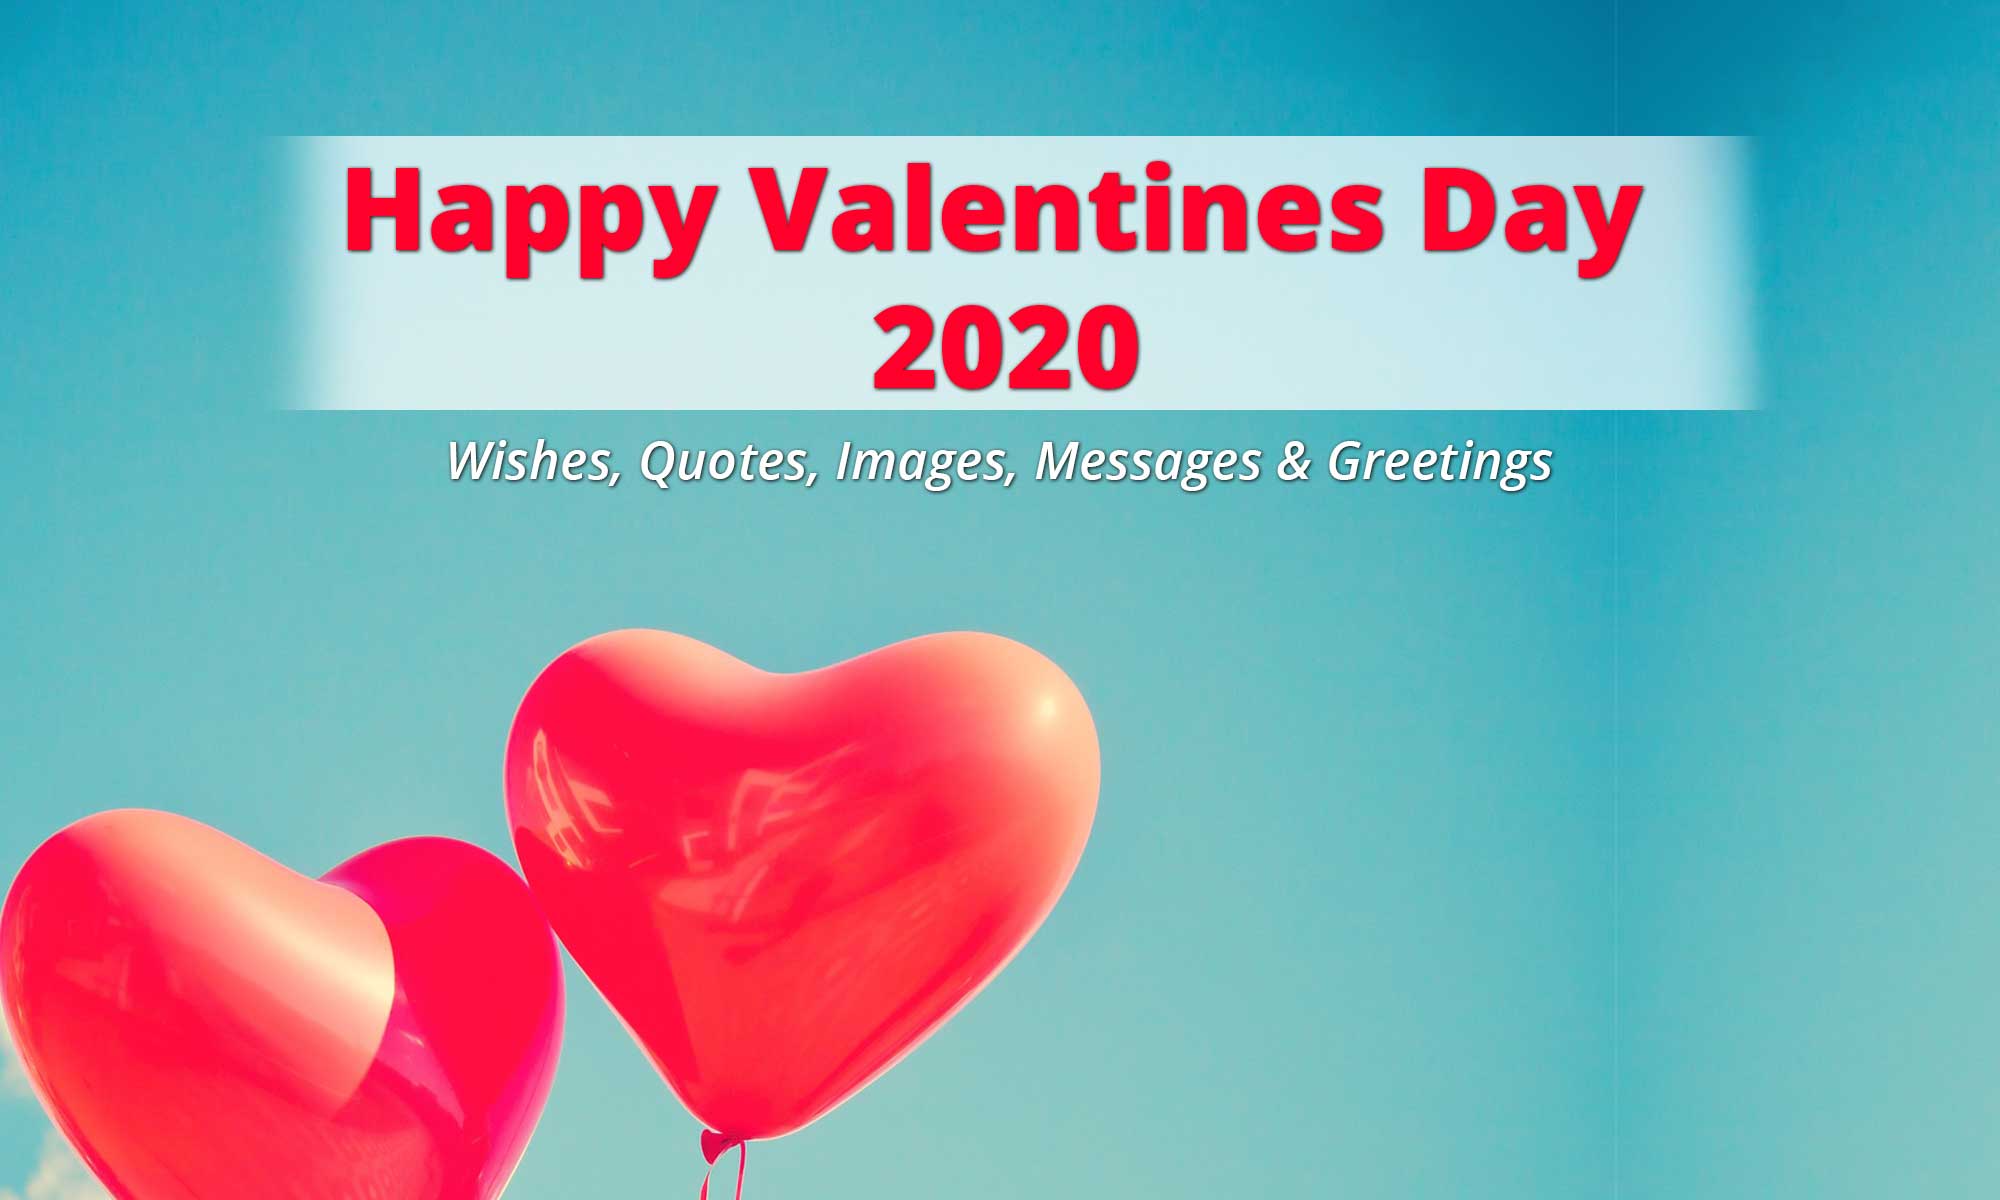 Happy Valentines Day 2020 Wishes, Quotes, Image, Messages